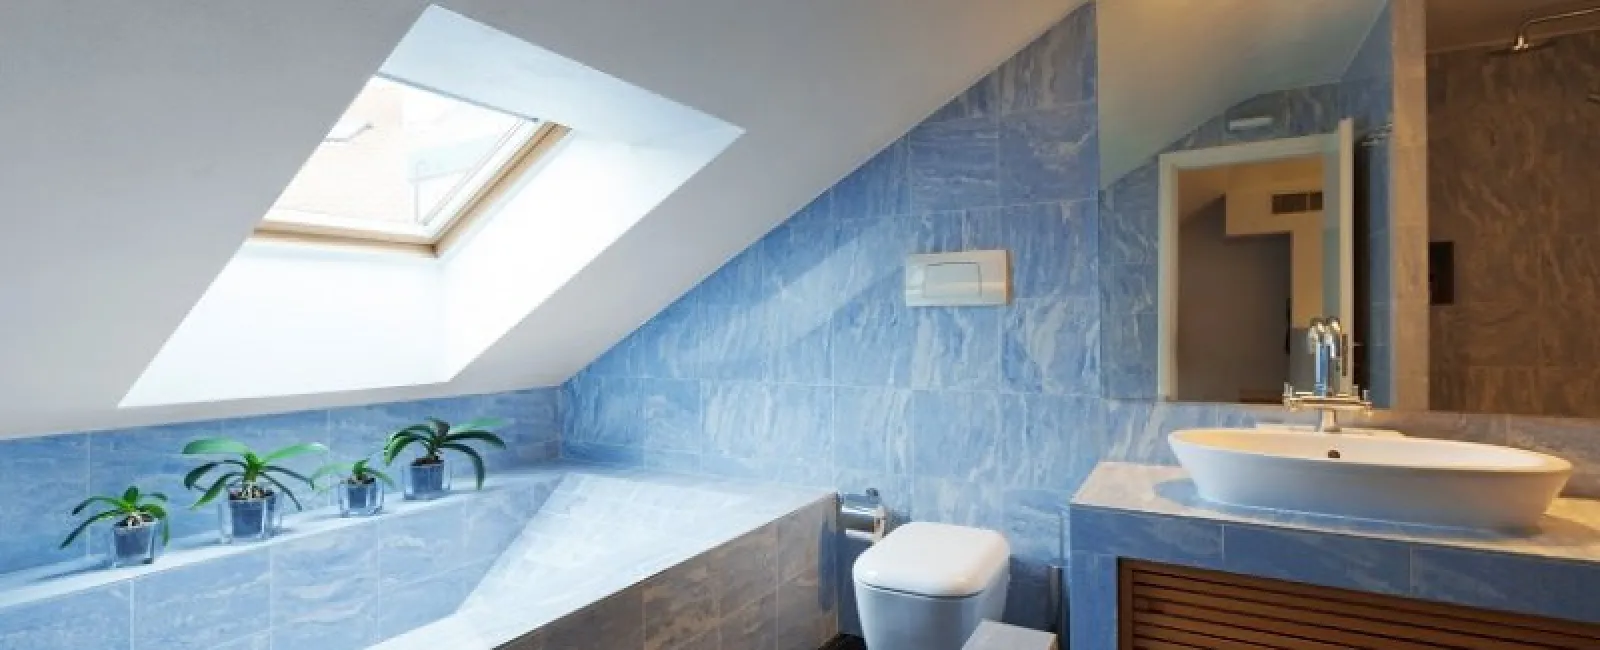 5 Main Reasons to Install a Skylight in Your Home